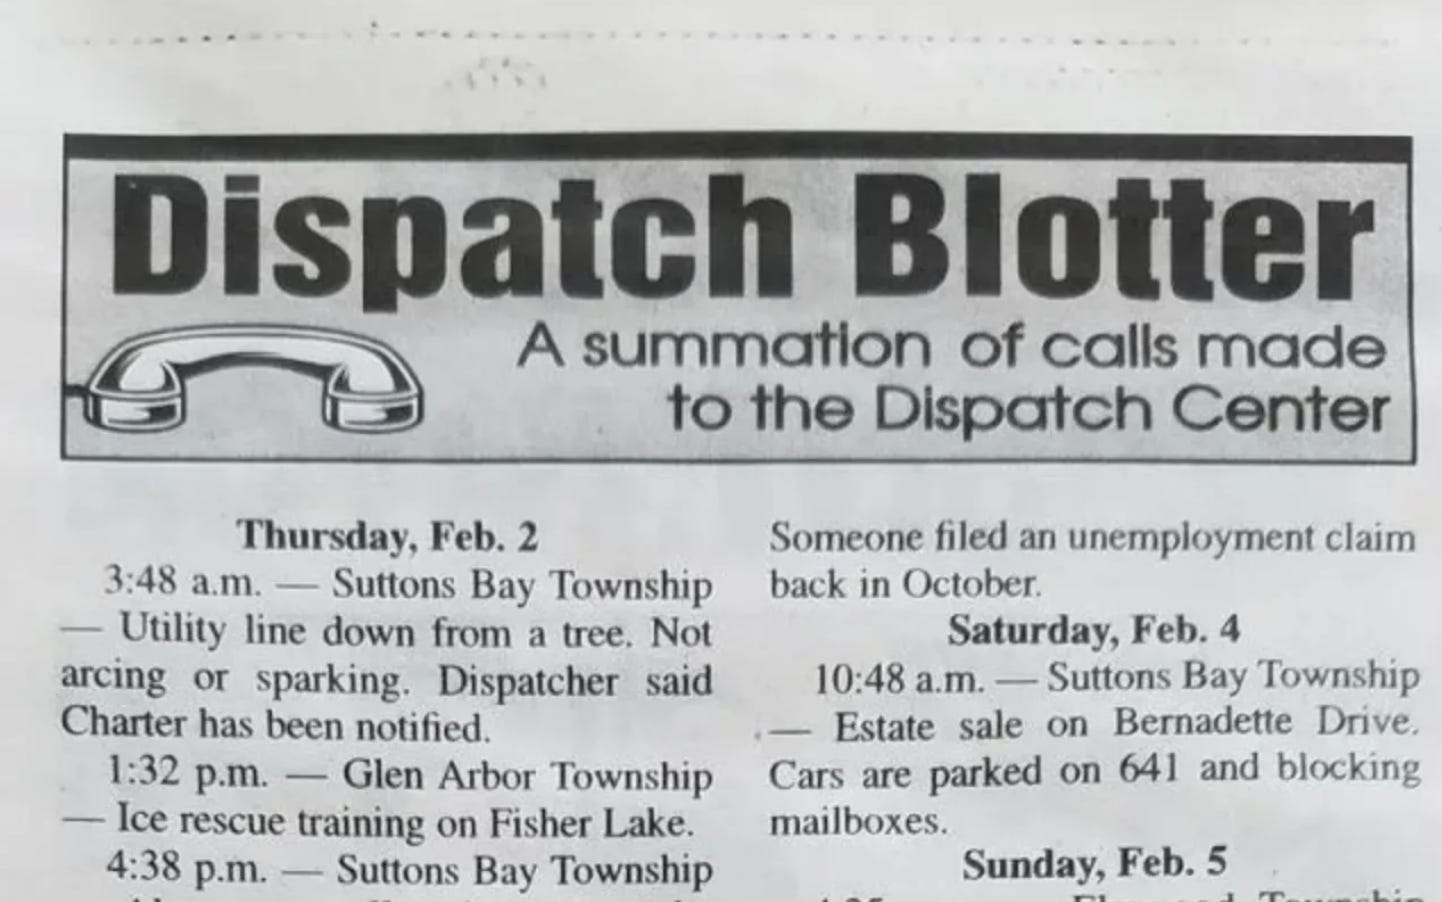 Image of a newspaper column that says "dispatch blotter" and a list of incidents 